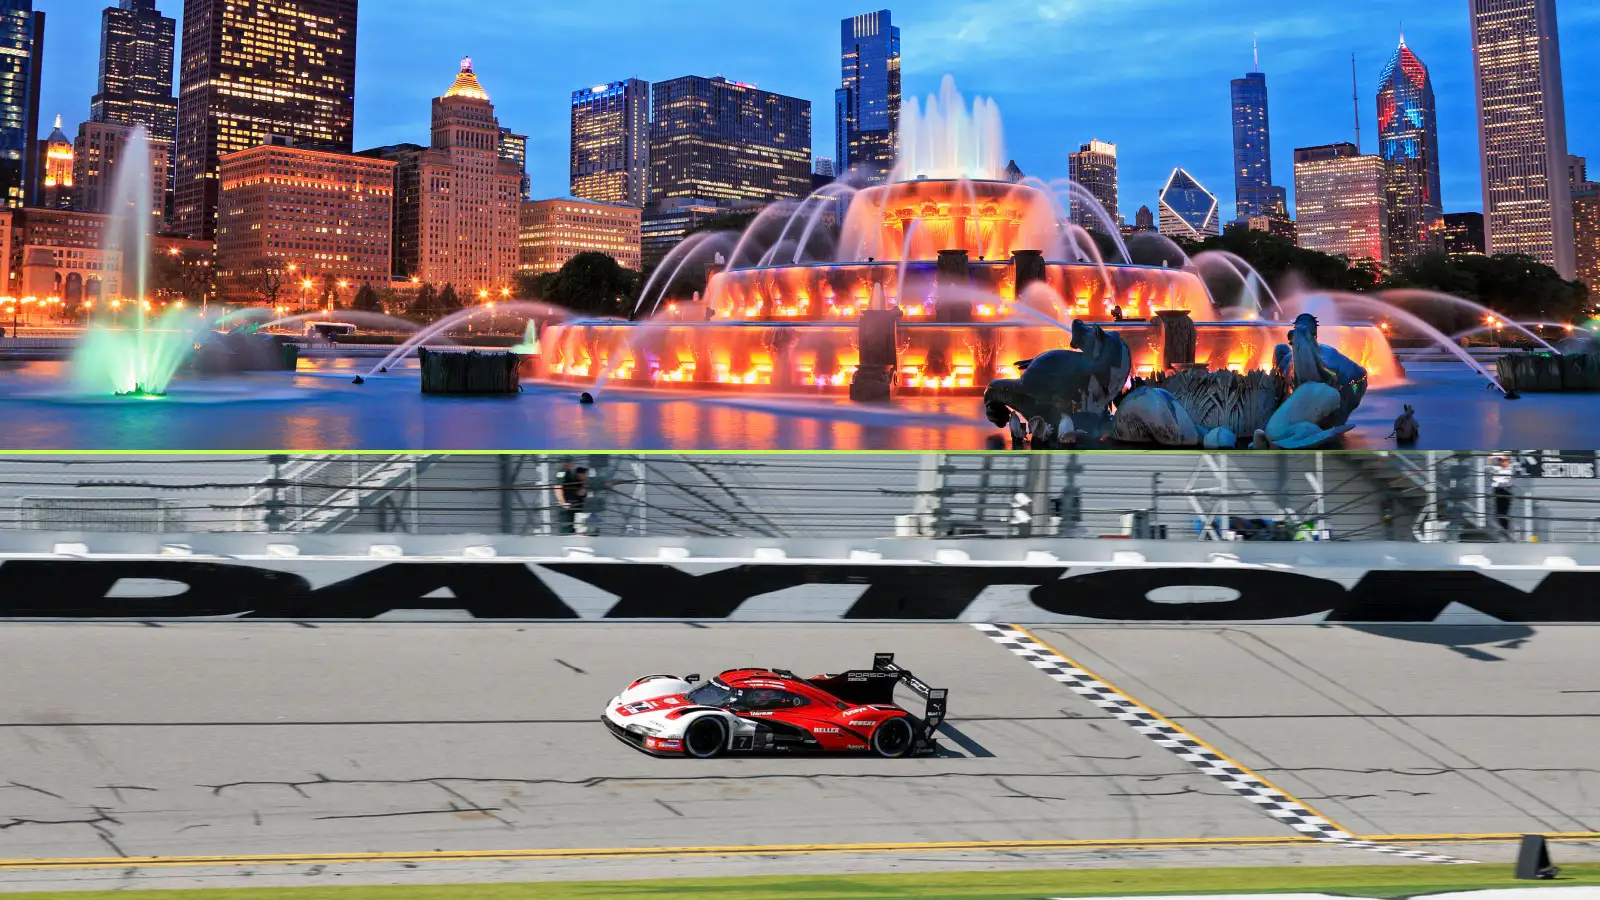 The Chicago skyline and Felipe Nasr's win at the Daytona 24 Hours dominate the F1 news this Sunday.